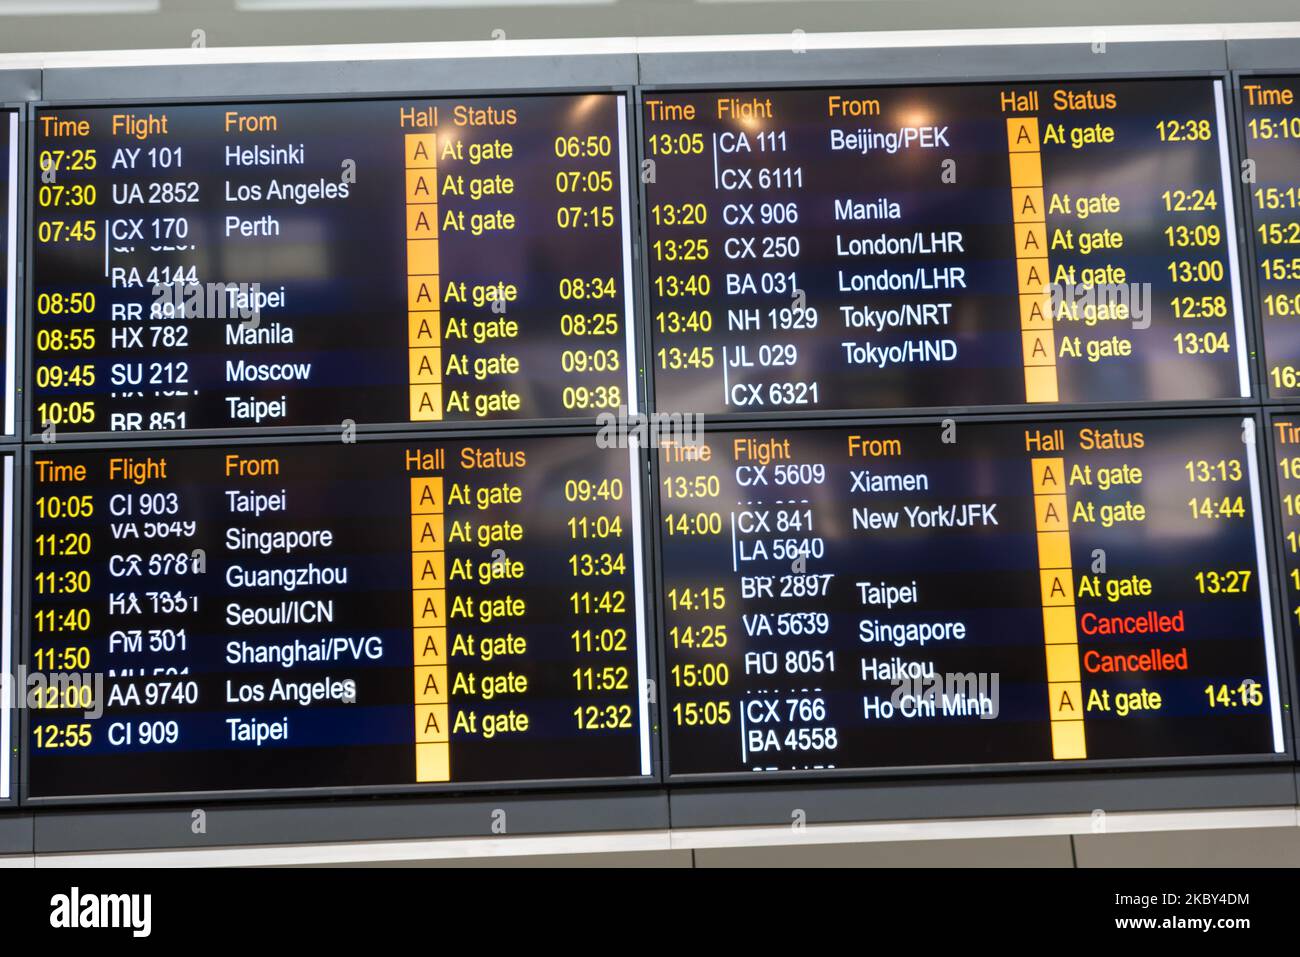 Arrival board in Hong Kong International Airport, China, on September 4, 2020. Once a hub of air travel in Asia, the pandemic has hit hard Hong Kong International airport, where air traffic is only a trickle of the pre-Covid times and where quarantine restrictions restrain residents from entering the city easily. Despite this, the service quality of Hong Kong airport's staff remains unparalleled, with very professional support to passengers, despite the minimalist settings. (Photo by Marc Fernandes/NurPhoto) Stock Photo